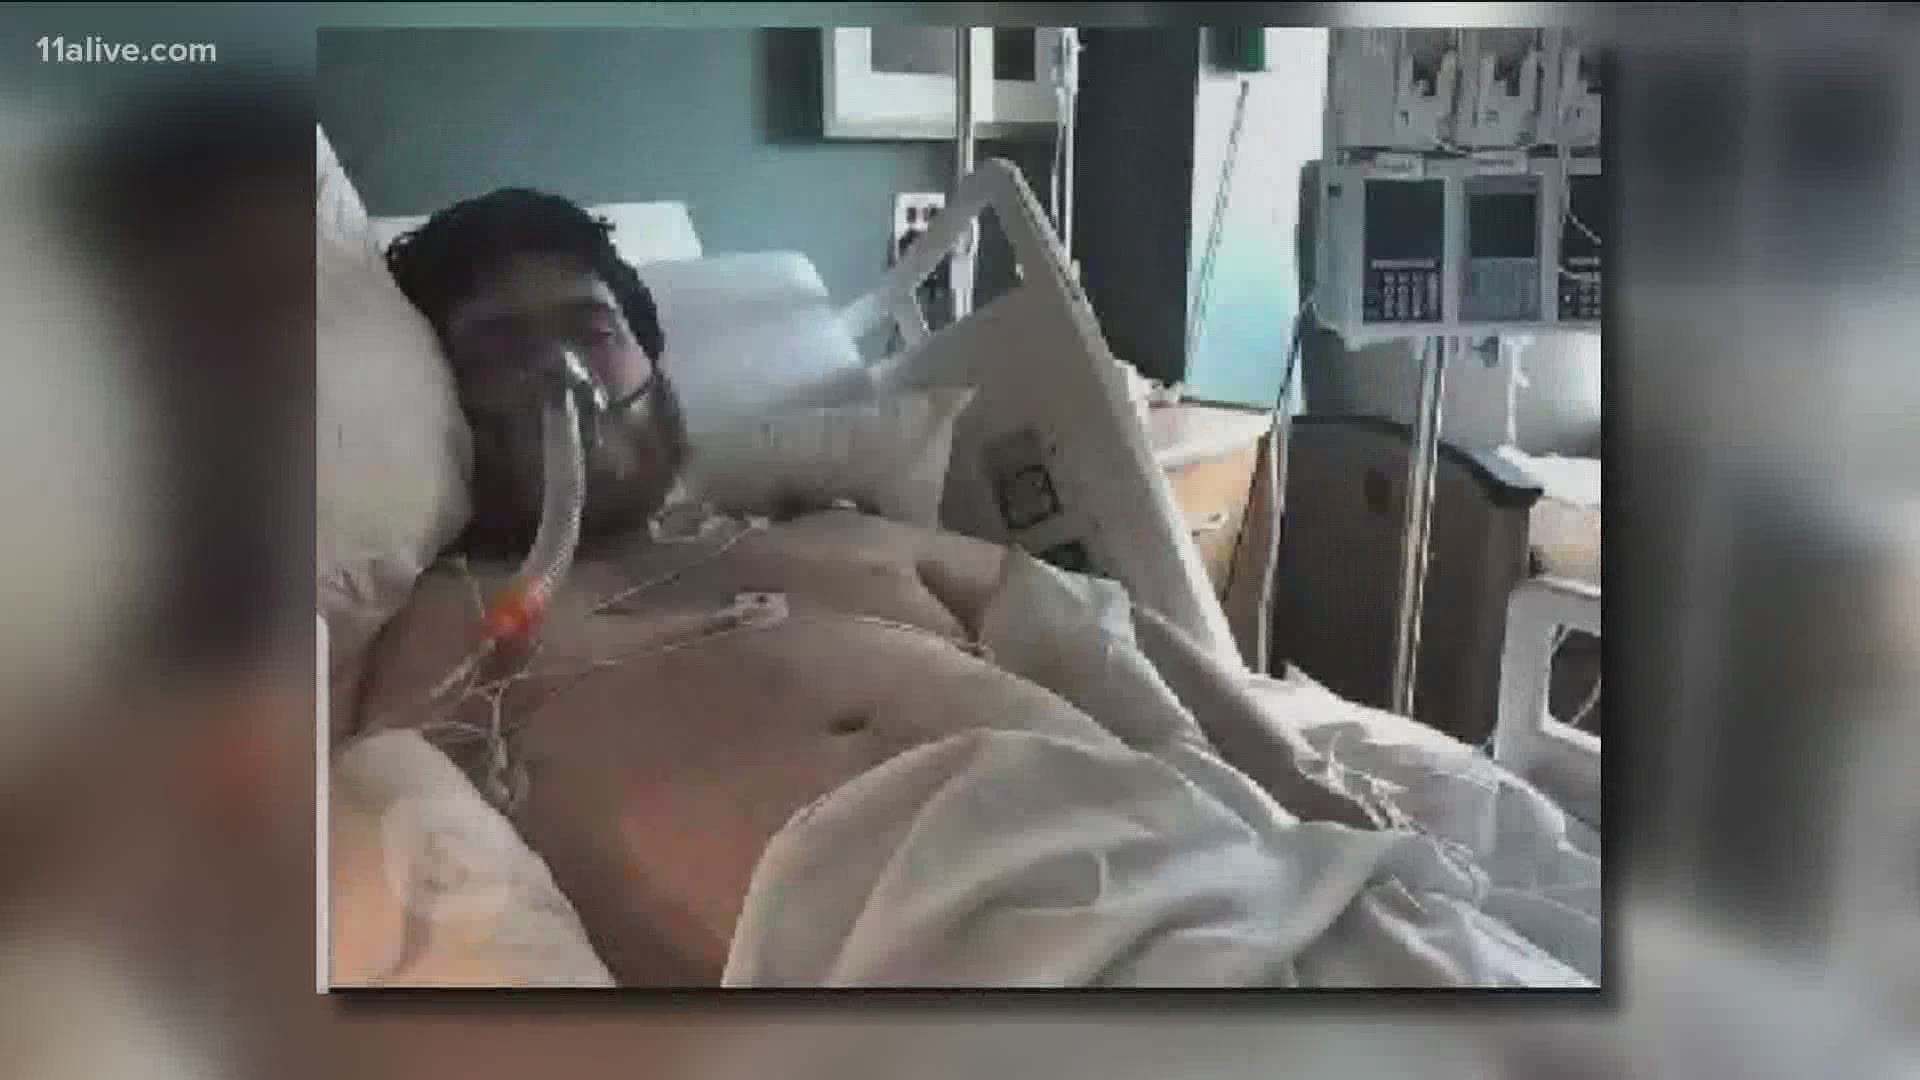 From a medically induced coma and a ventilator, Michael Mullininx is fighting back. And he's finally home. But, the 22-year-old still has a long road ahead.